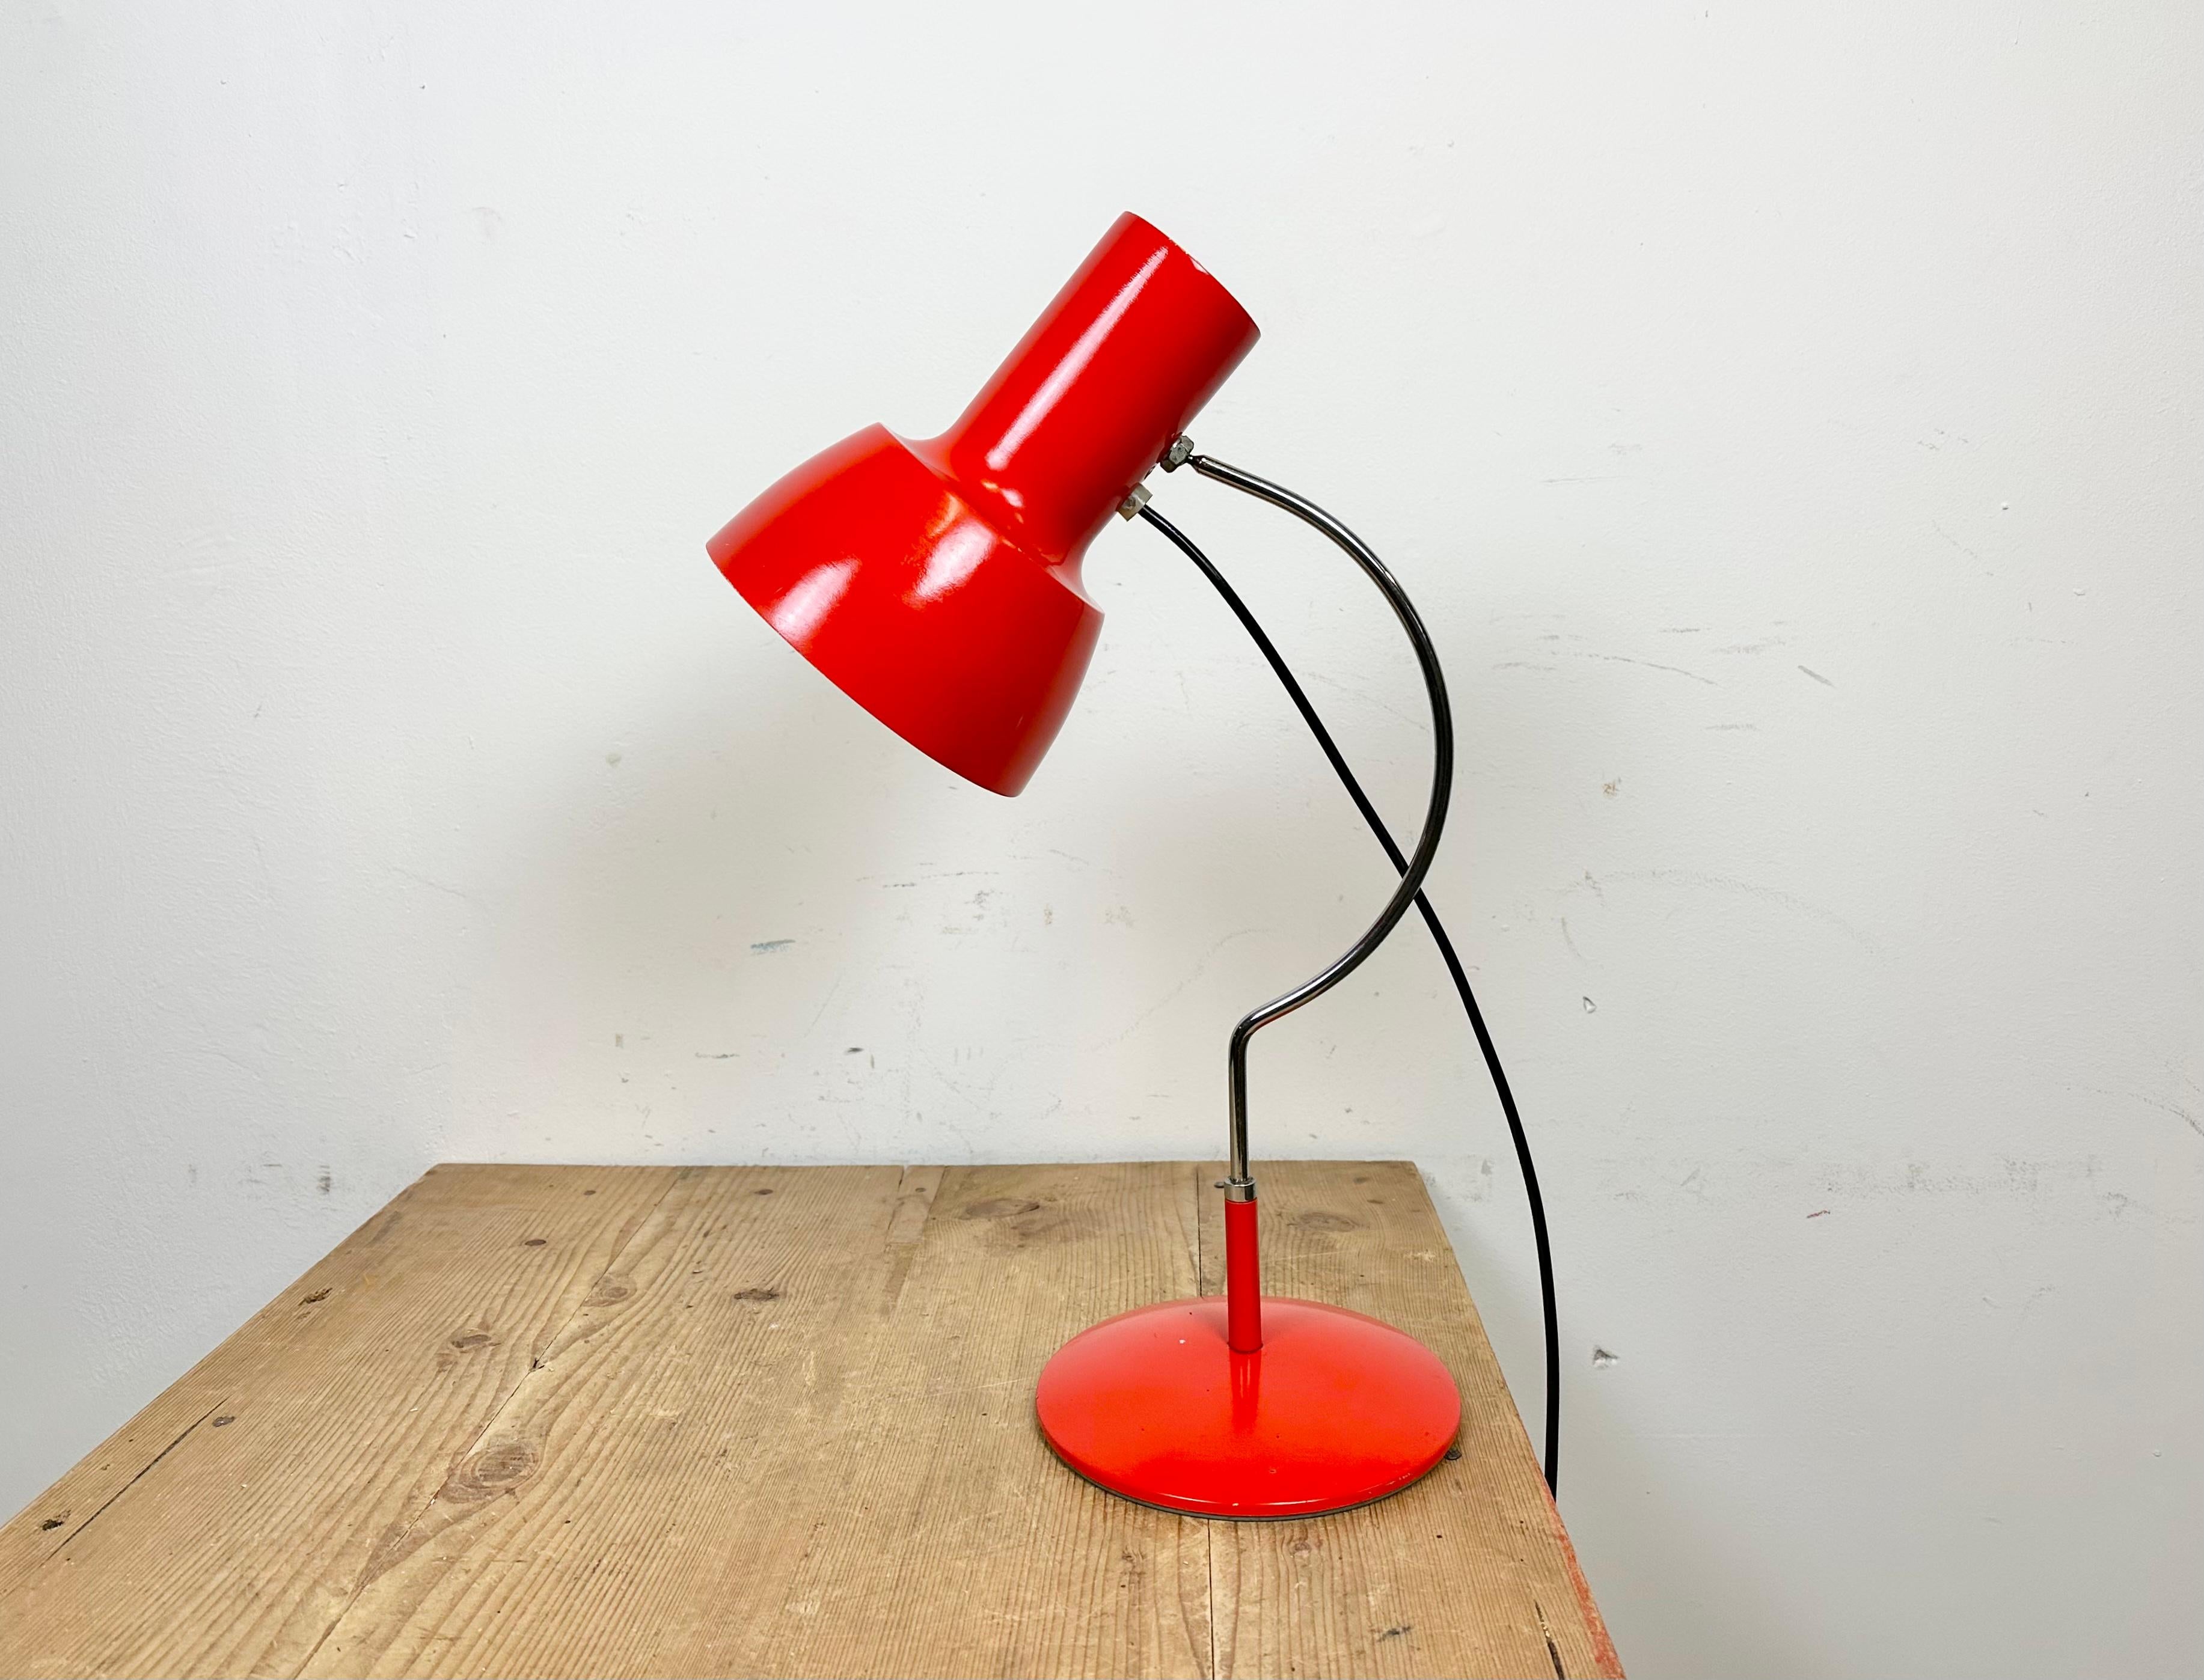 This table lamp, Napako model 1633, was designed by Josef Hurka and produced by Napako in former Czechoslovakia during the 1960s. The lamp has a steel body and an aluminium lampshade.Switch is situated directly on the shade. Good vintage condition.